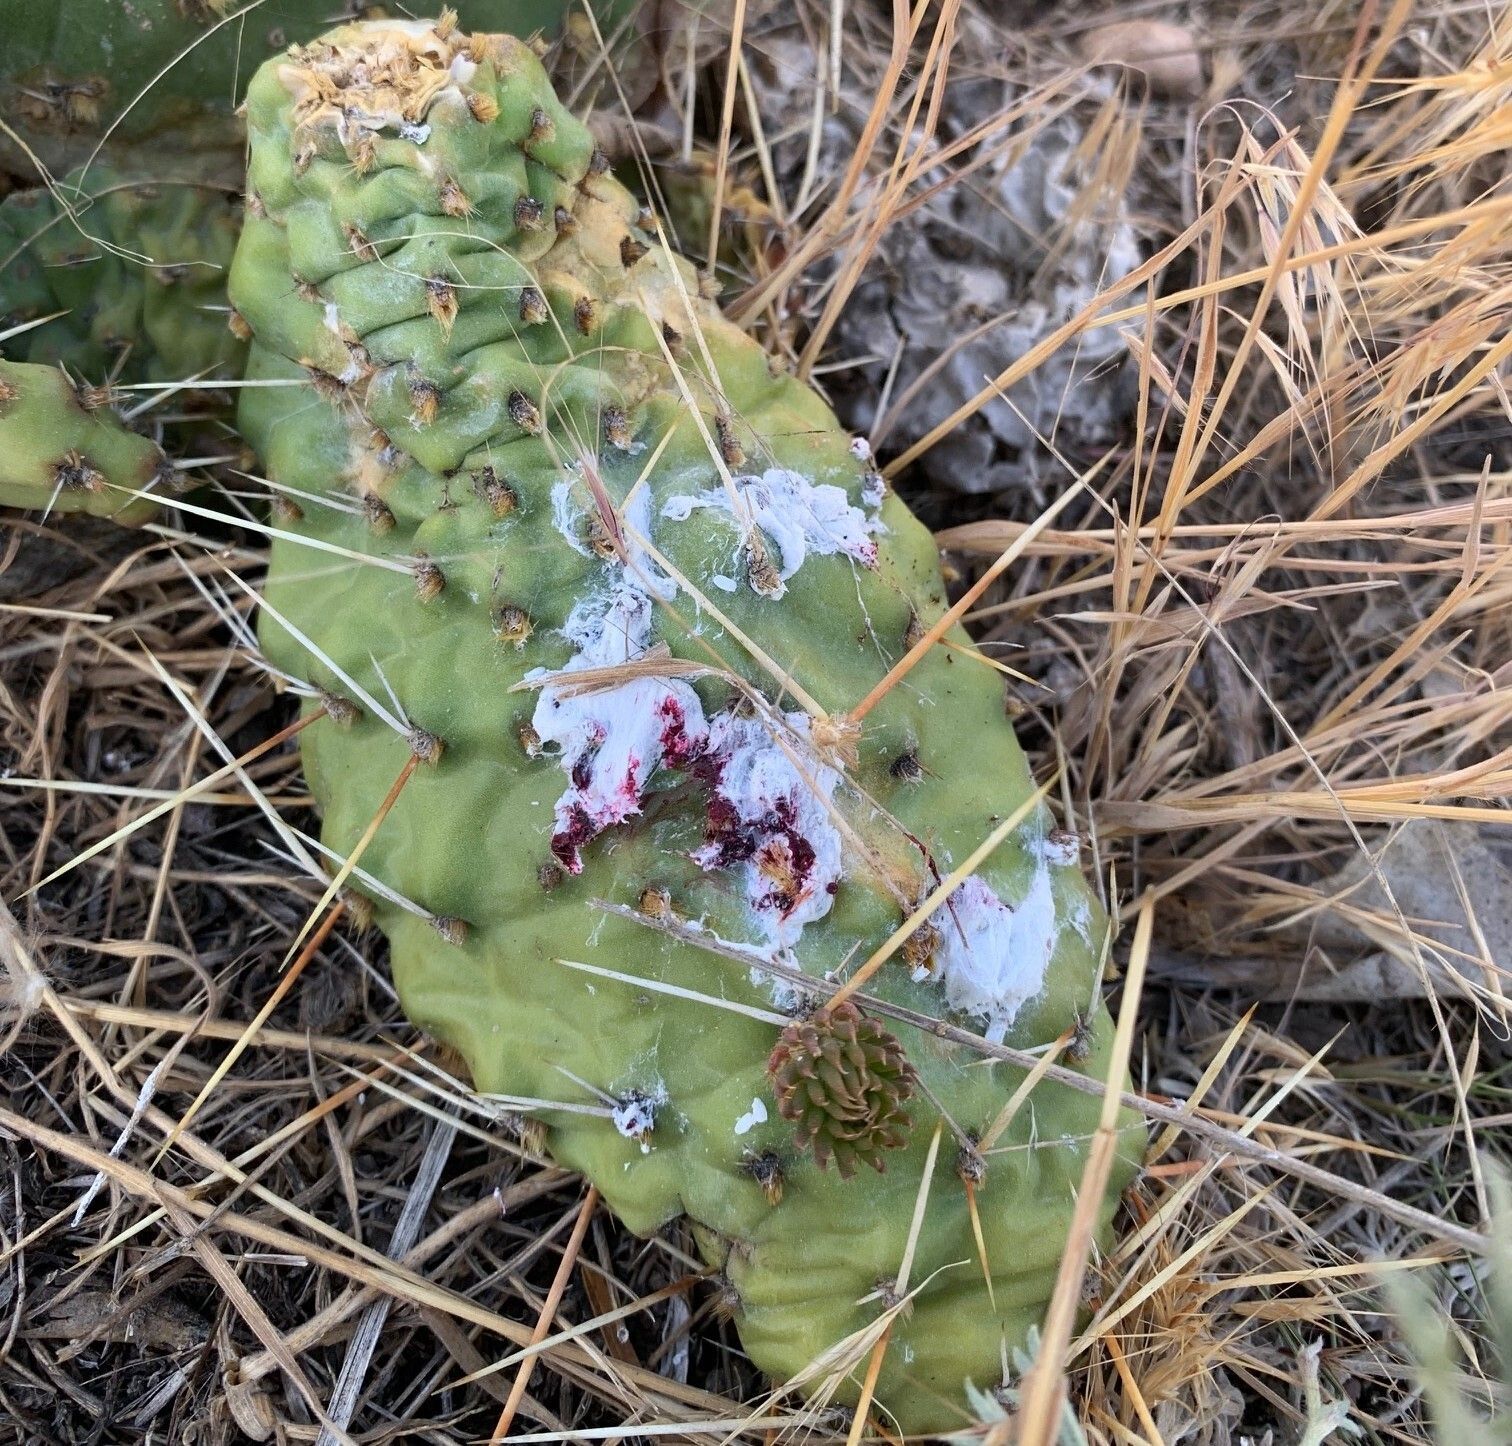 Cochineal Scale Insects on Nebraska Prickly Pear